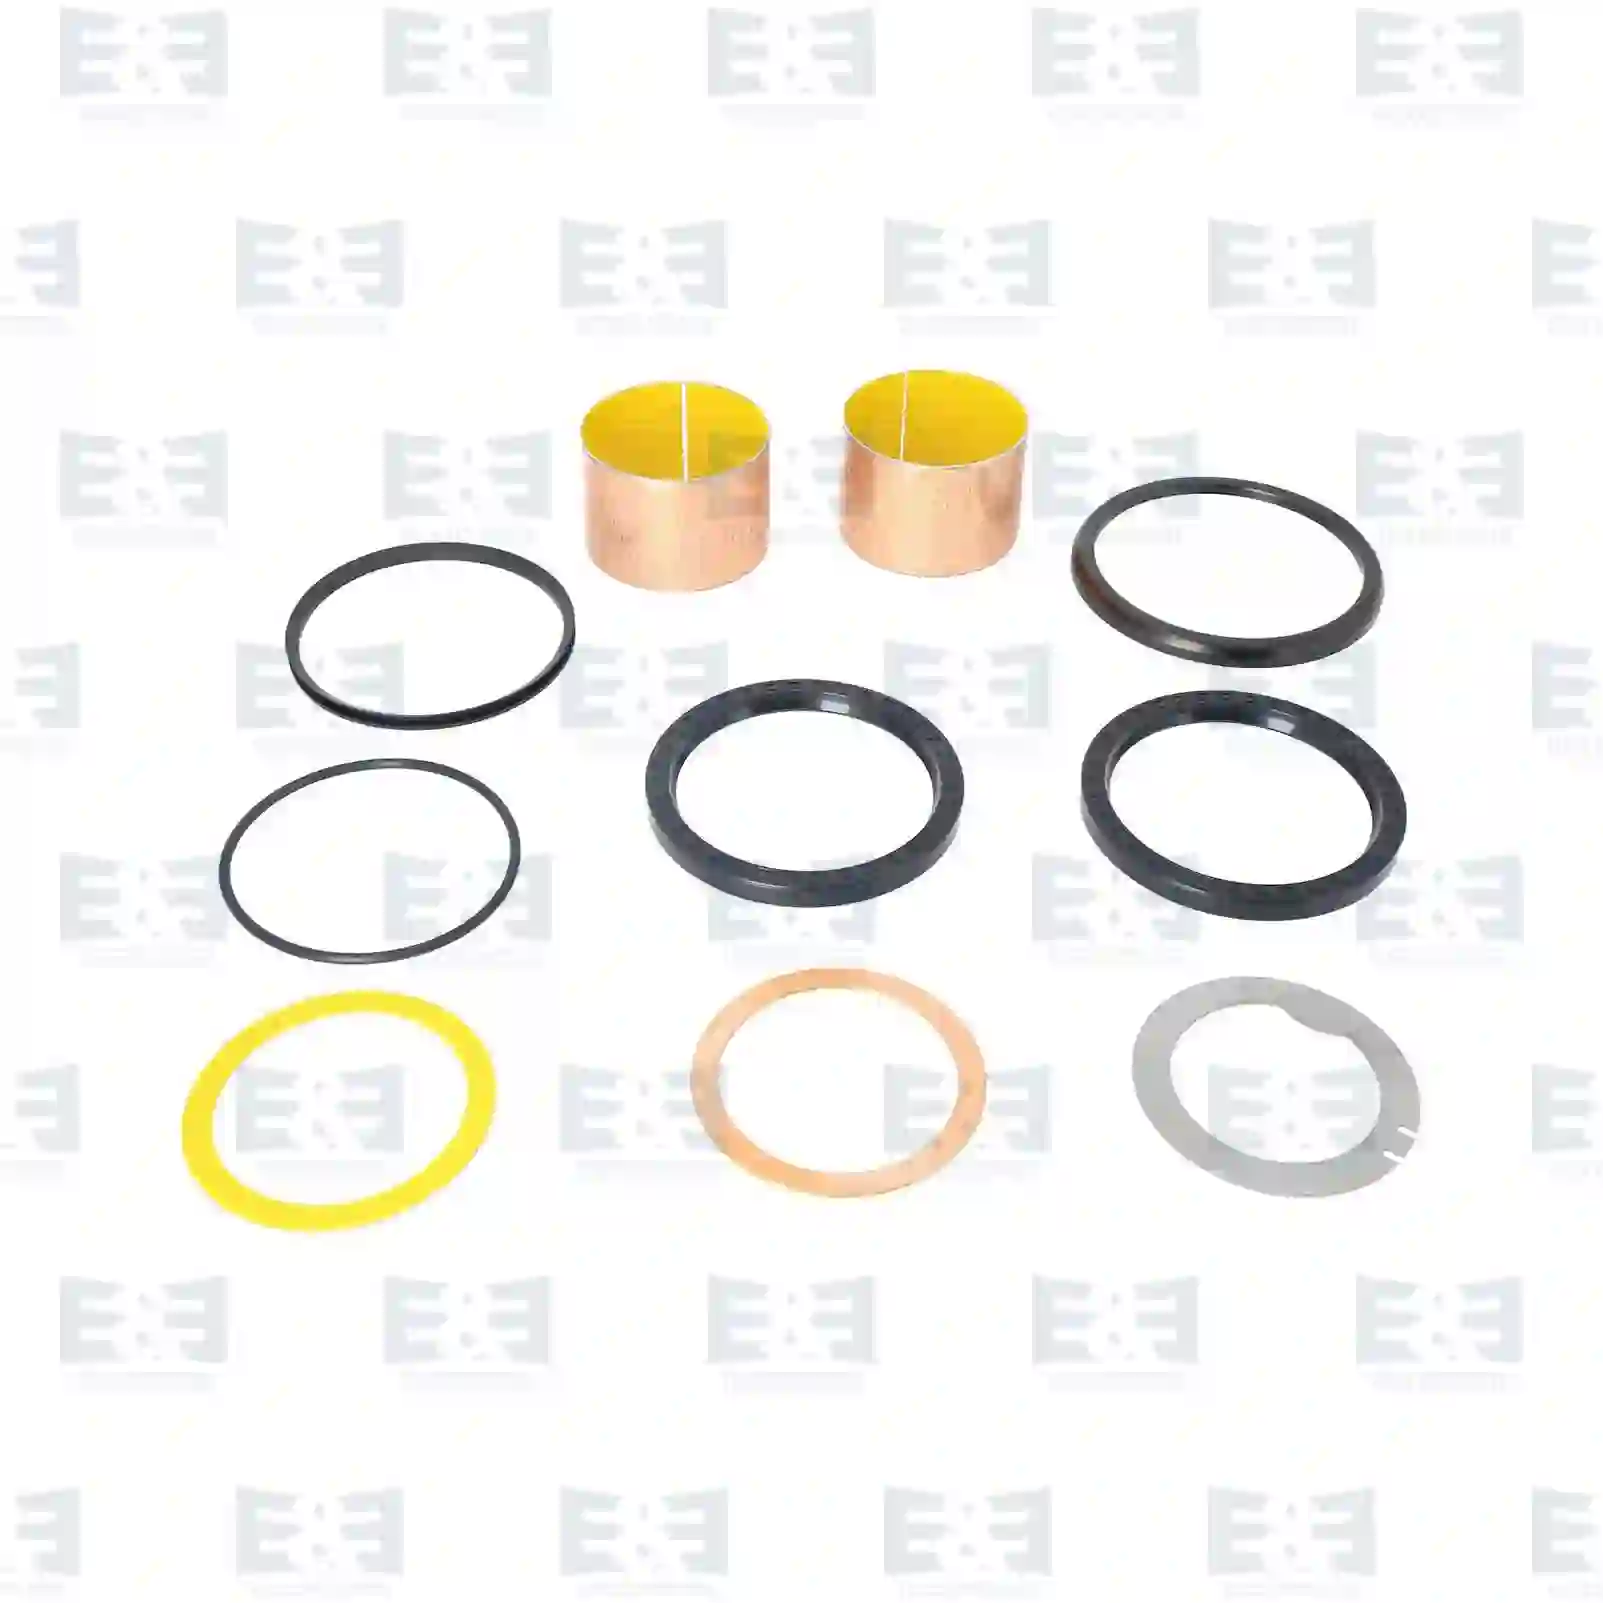 Repair kit, spring saddle, without grease nipple, 2E2283593, 2262363 ||  2E2283593 E&E Truck Spare Parts | Truck Spare Parts, Auotomotive Spare Parts Repair kit, spring saddle, without grease nipple, 2E2283593, 2262363 ||  2E2283593 E&E Truck Spare Parts | Truck Spare Parts, Auotomotive Spare Parts